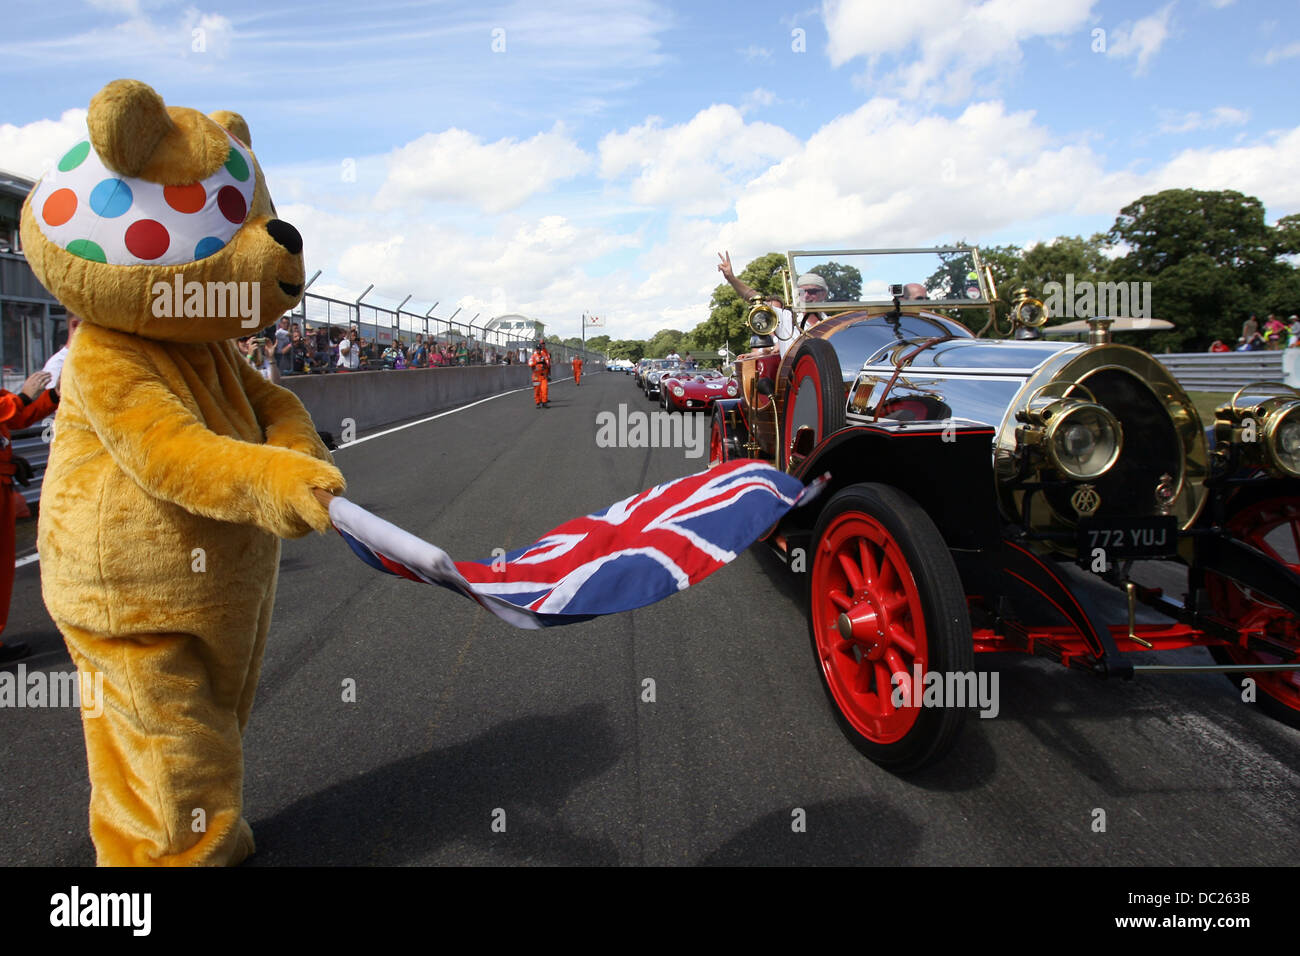 BBC-Kinder in Not Pudsey Wellen Chris Evans aus in seinem Chitty Chitty Bang Bang Film Auto bei CarFest North, Oulton Park. Stockfoto